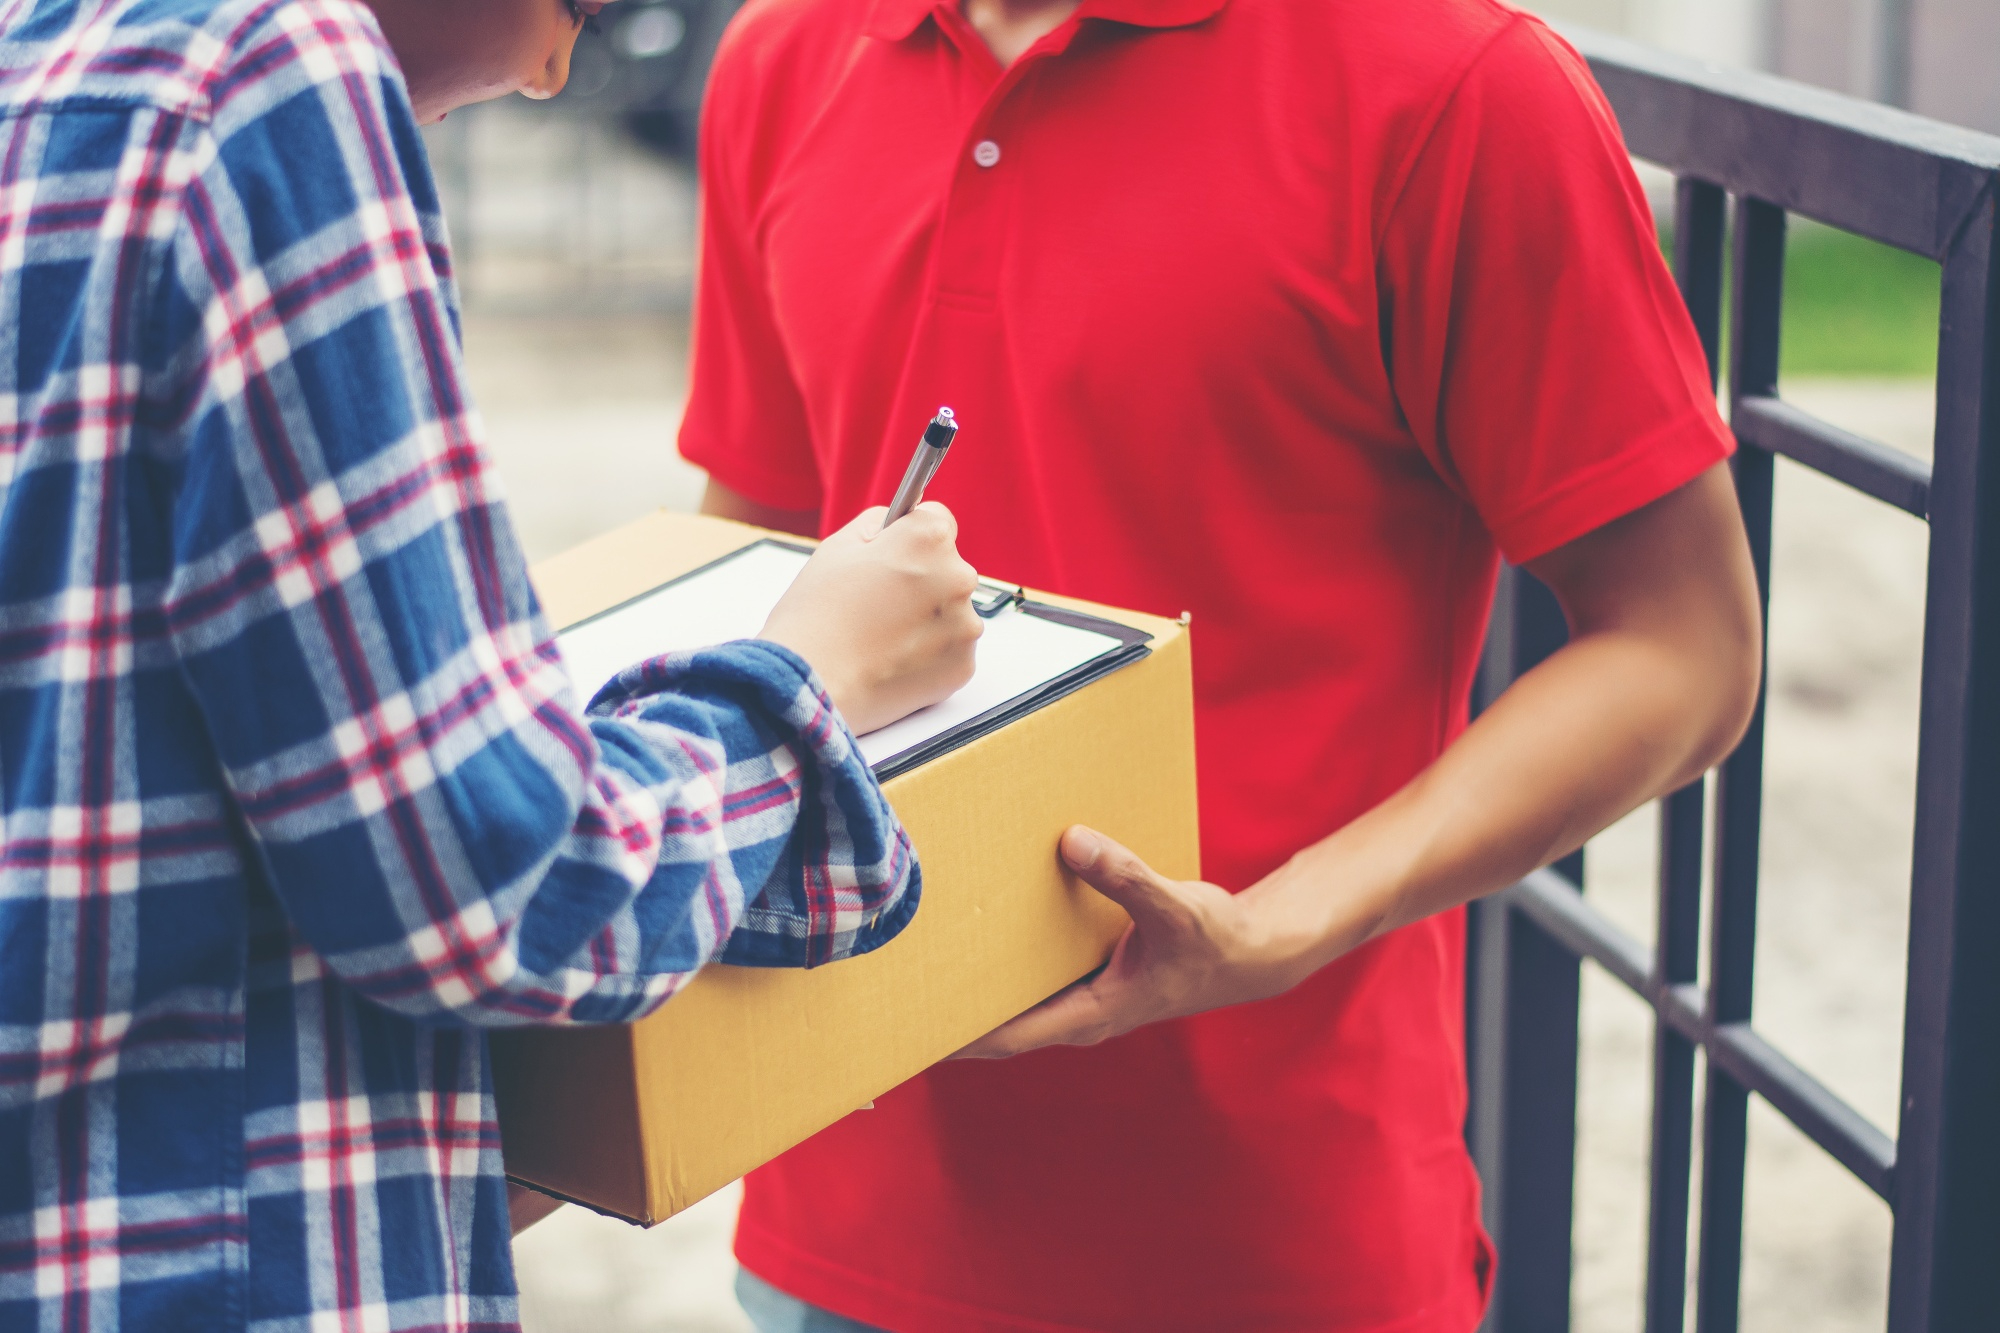 Man signing a form while receiving a package from a delivery person